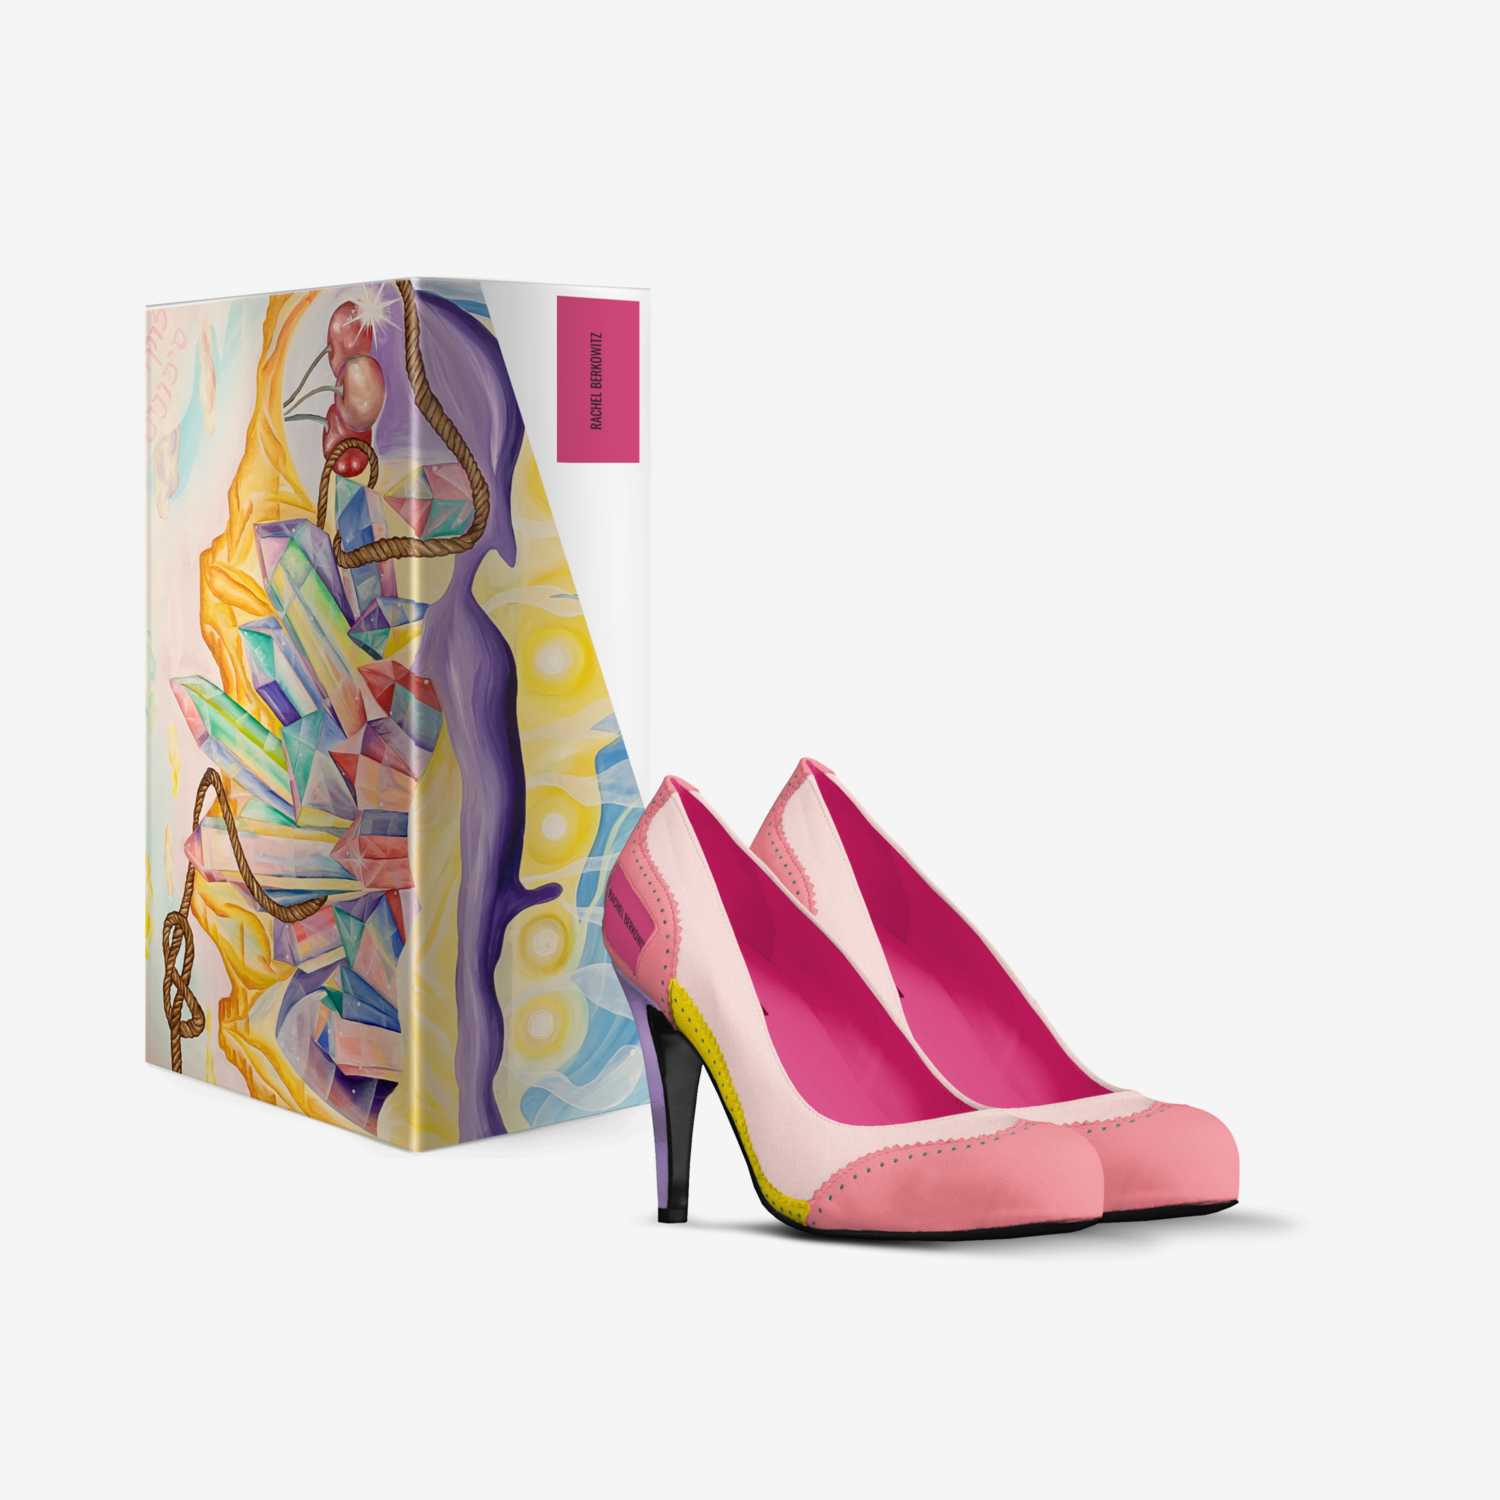 Sophisticate Me custom made in Italy shoes by Rachel Berkowitz | Box view